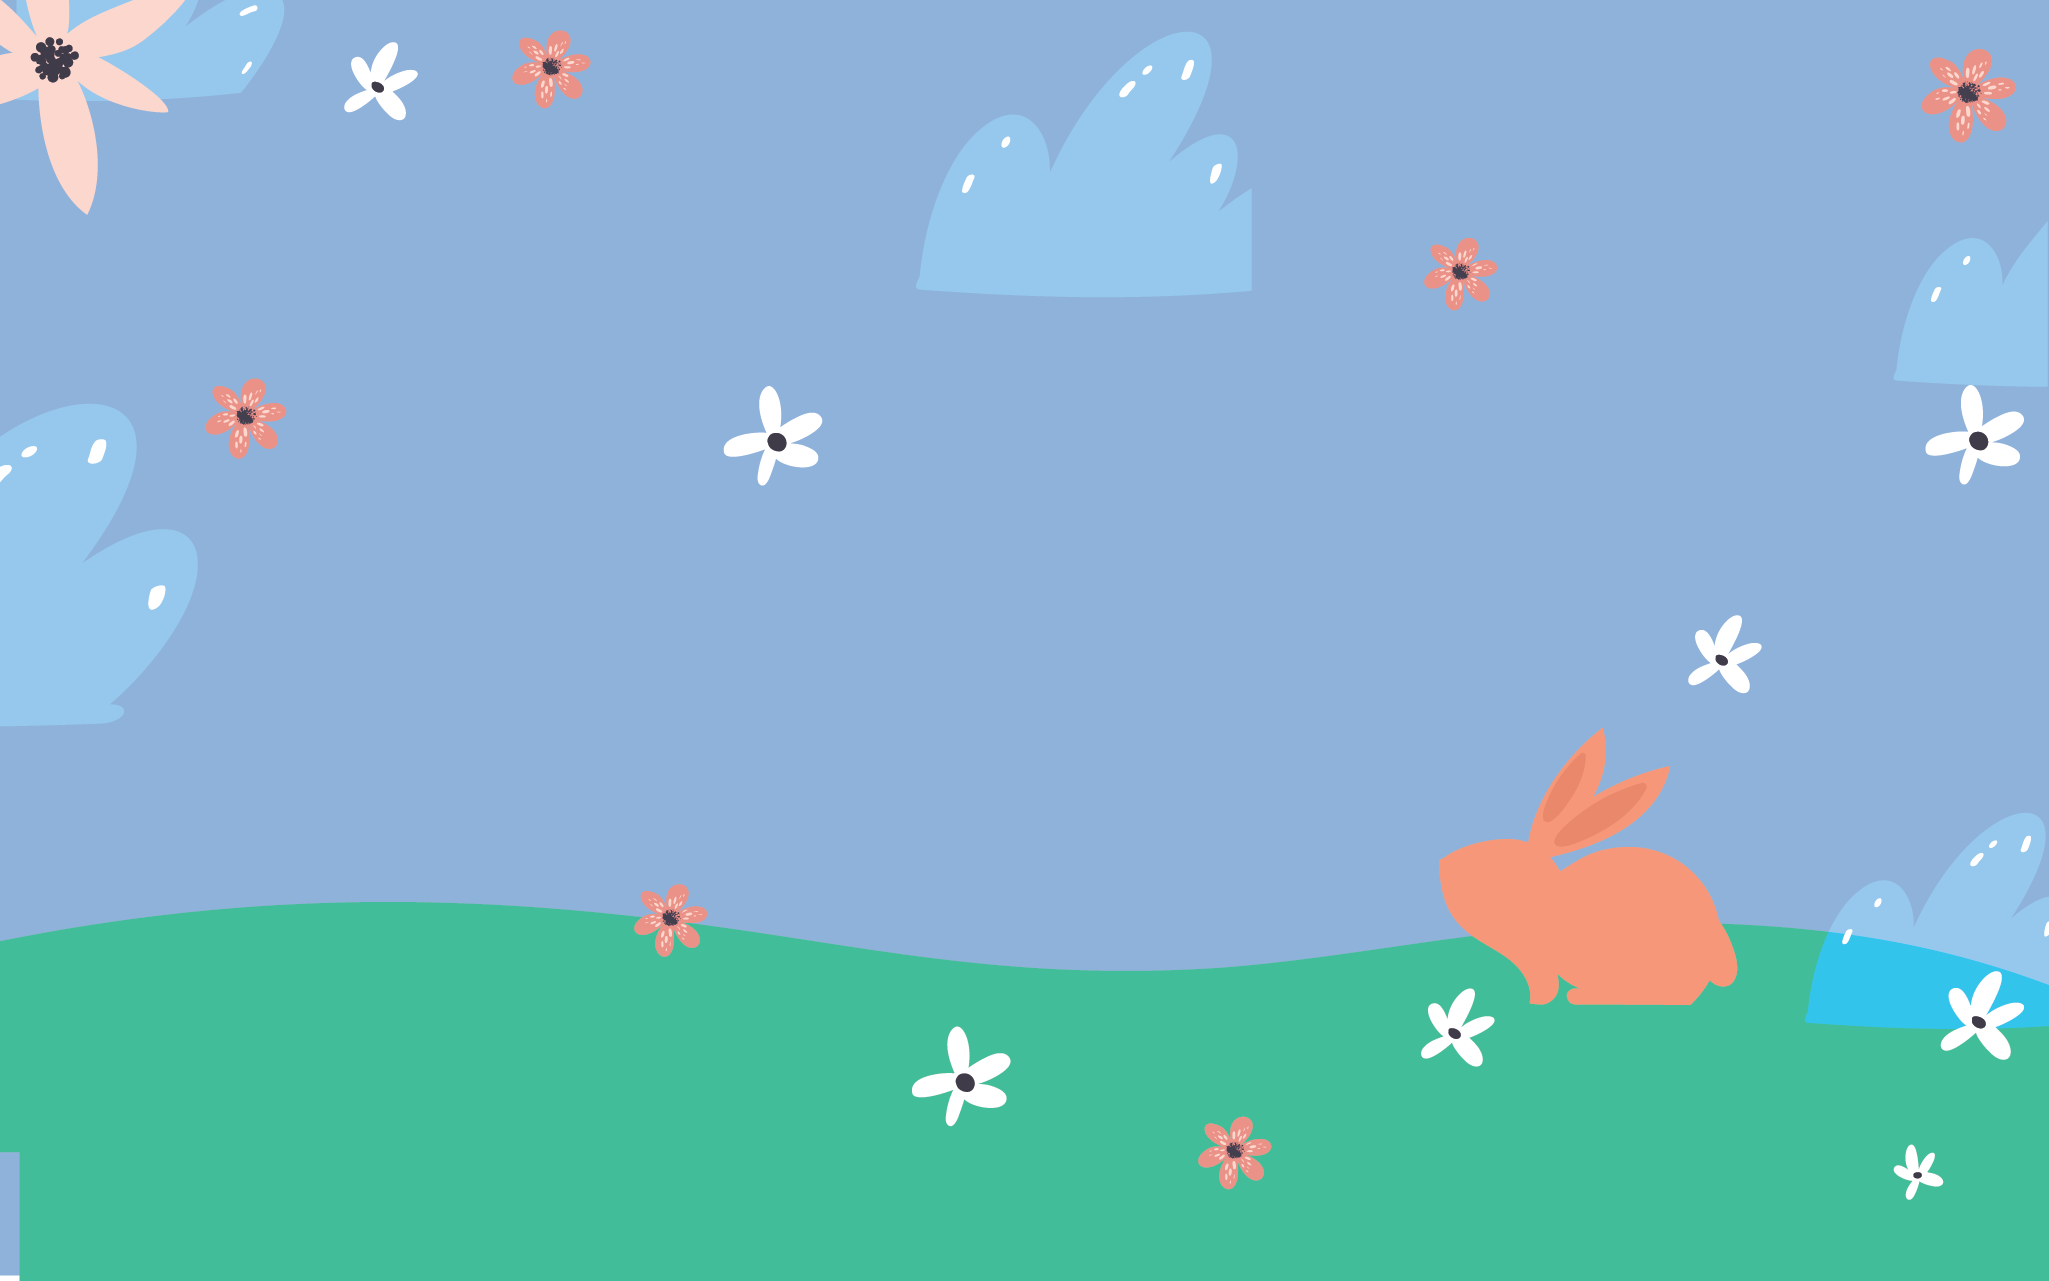 a rabbit on a grass field with flowers